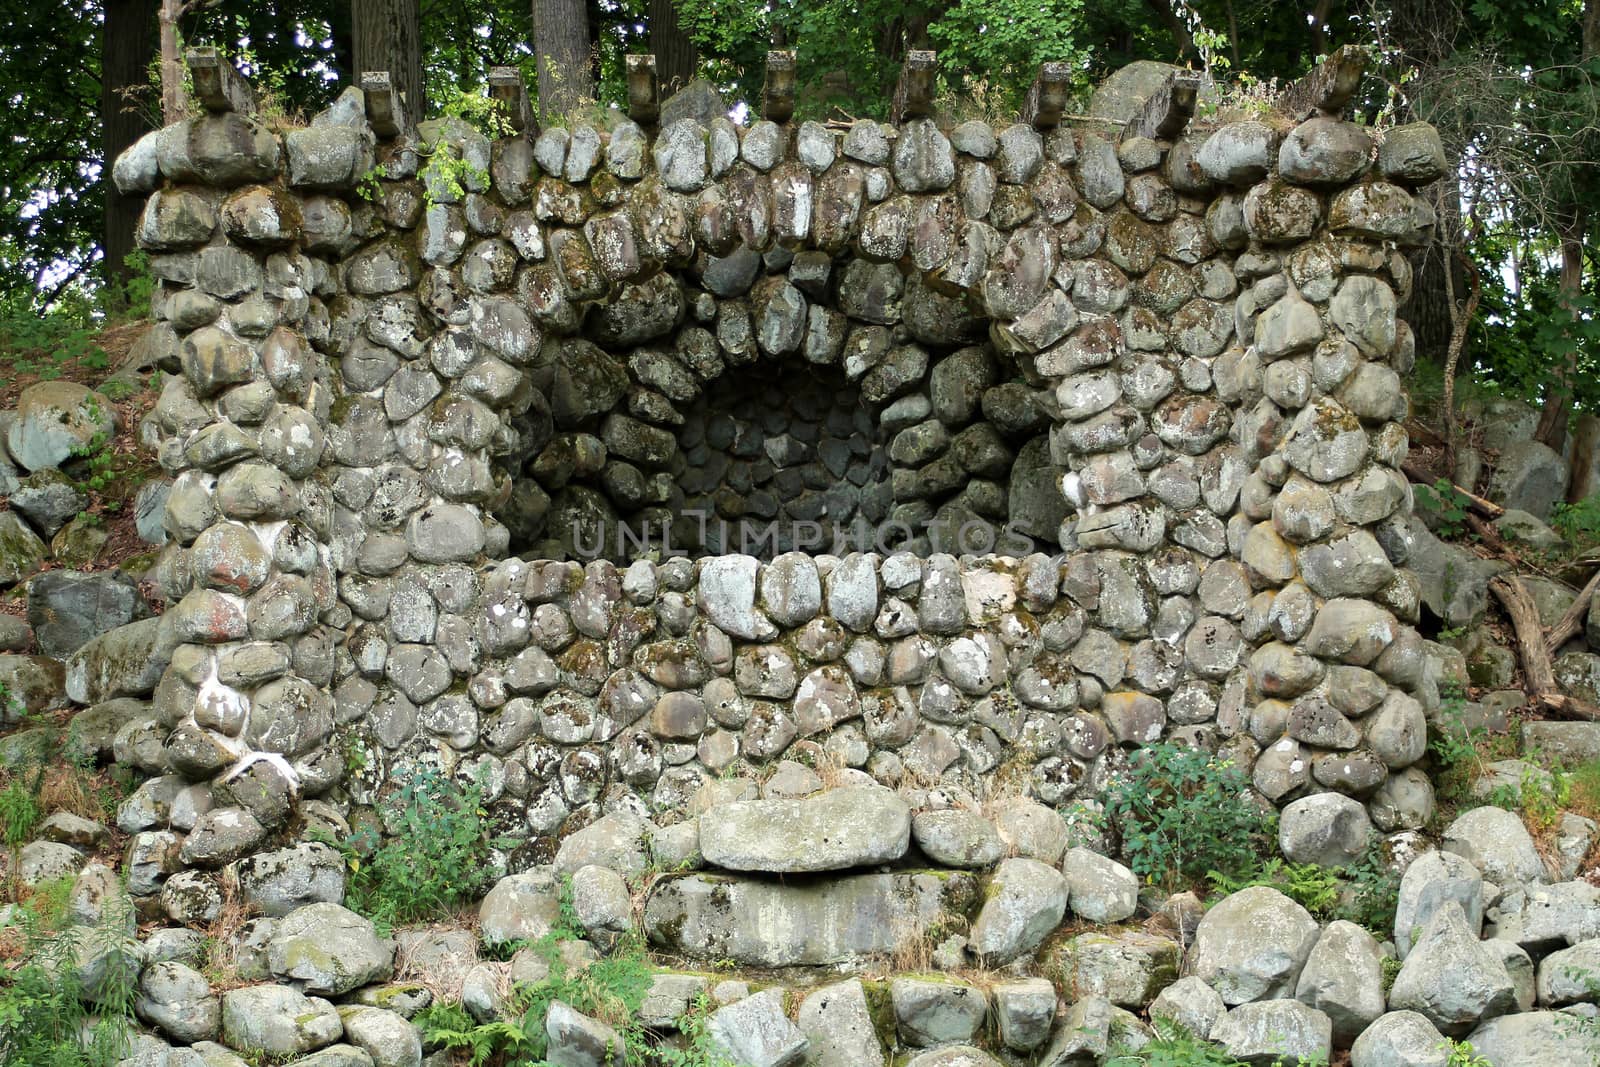 A Old stone well building